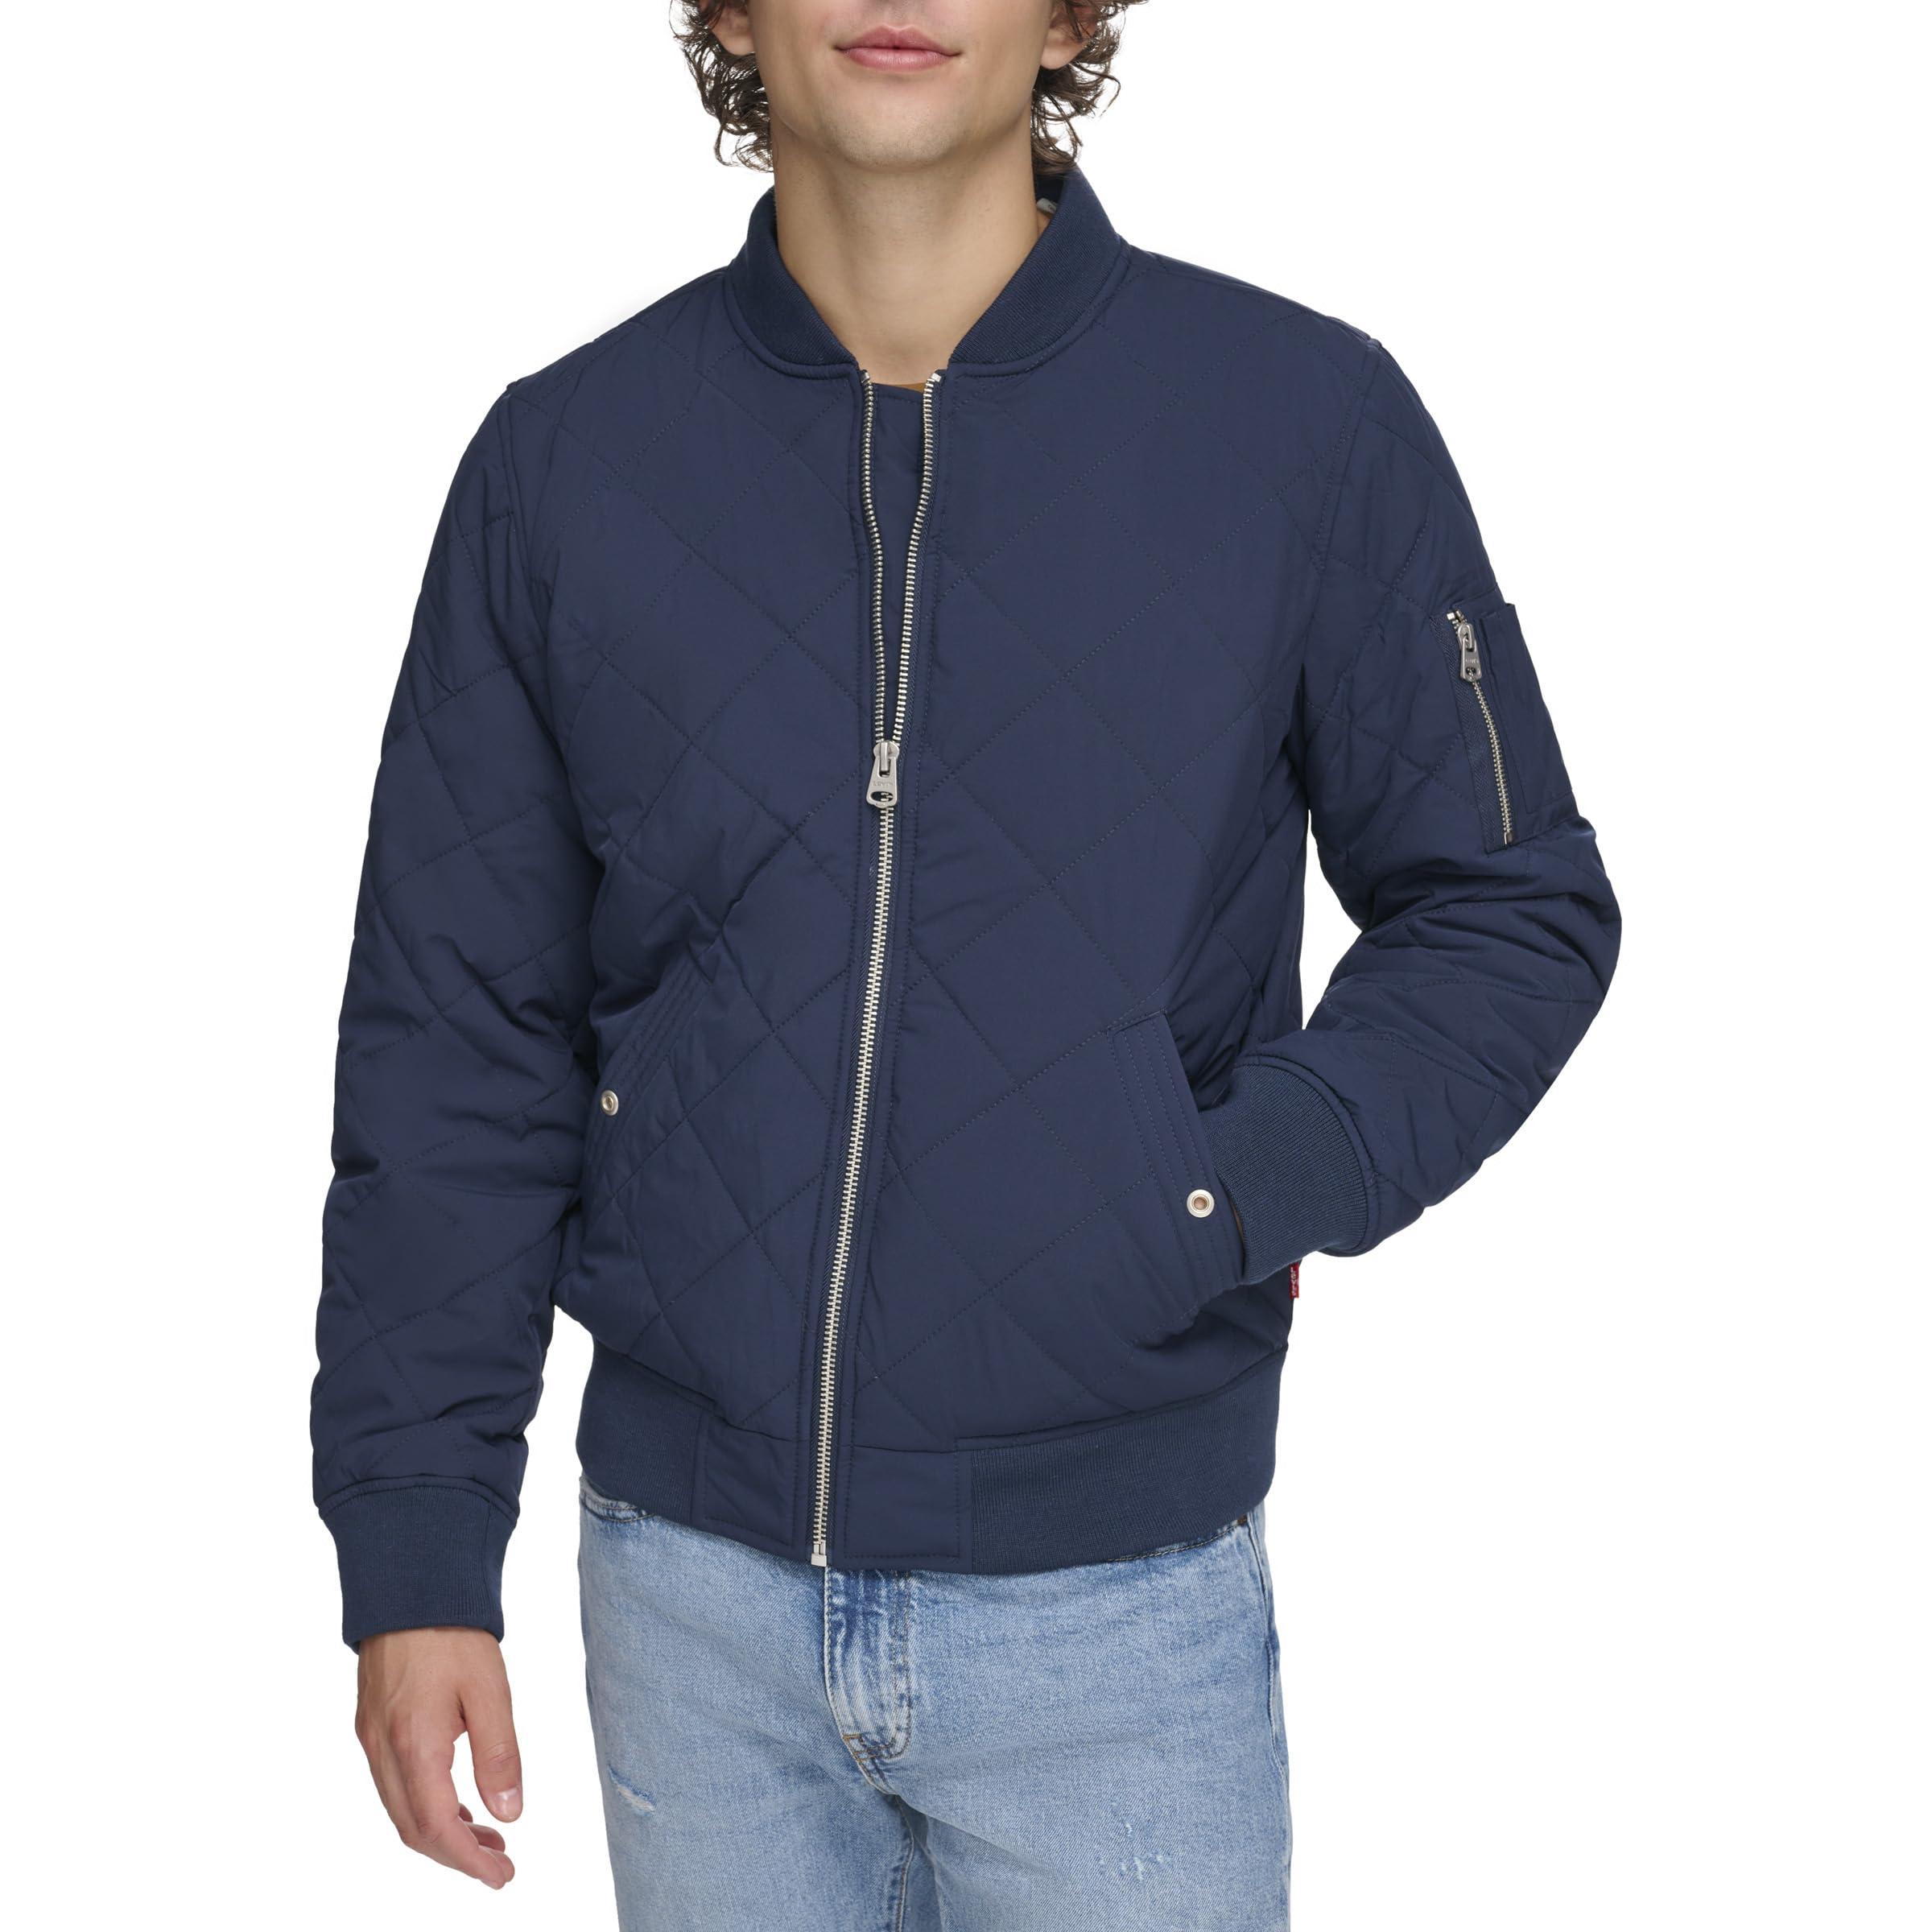 Levi's Diamond Quilted Bomber Jacket in Blue for Men